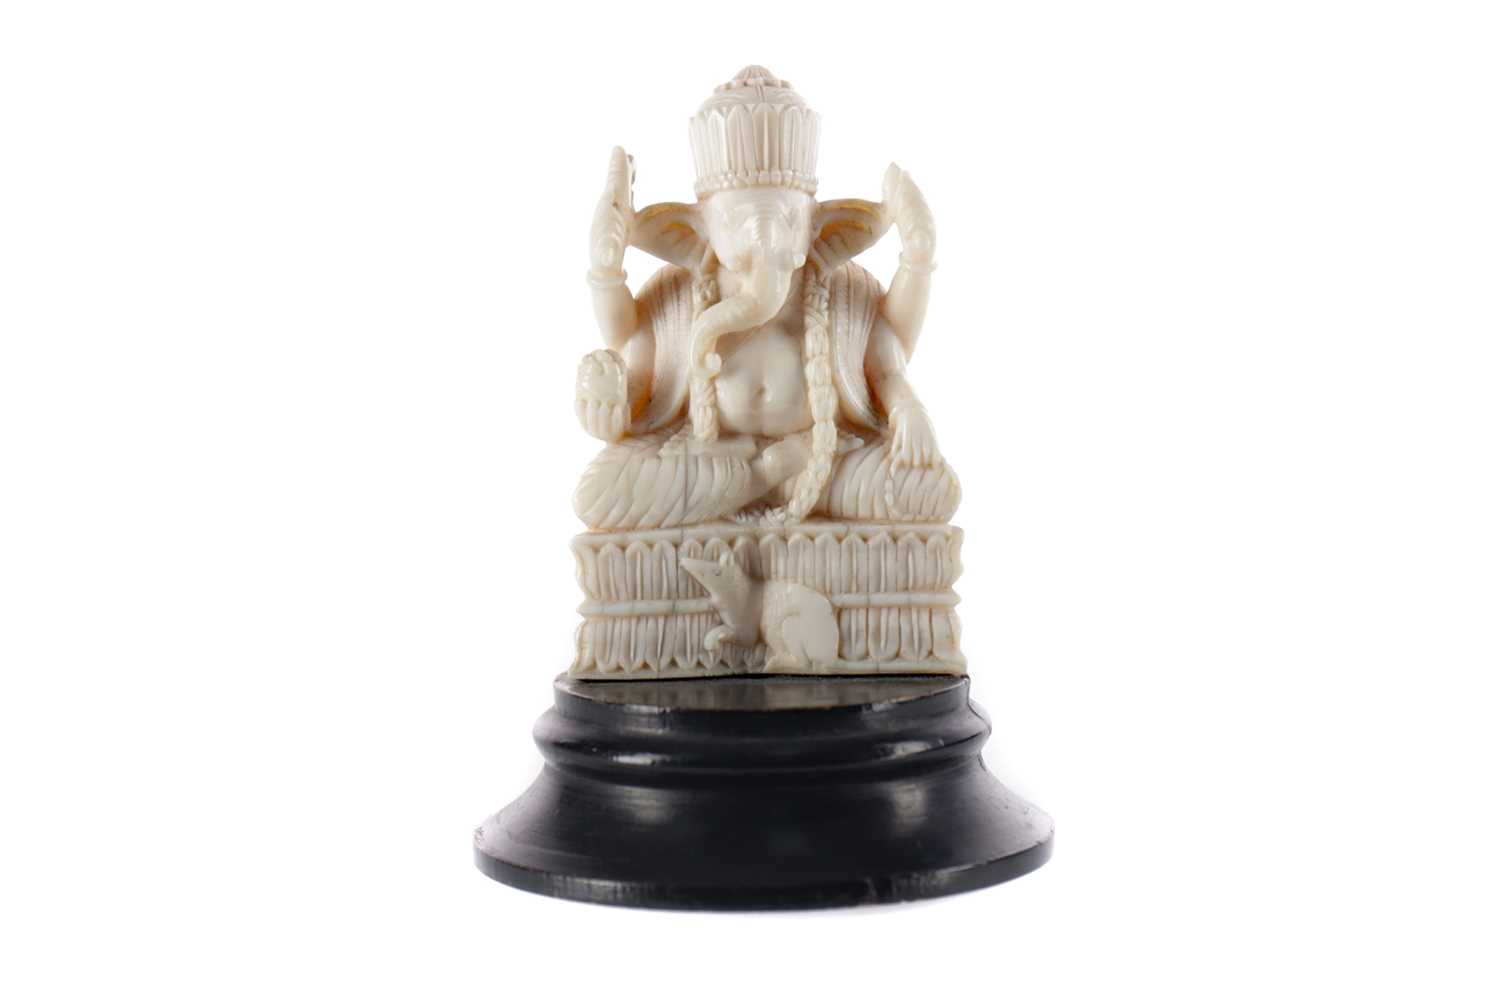 Lot 708 - A LATE 19TH/EARLY 20TH CENTURY INDIAN CARVED IVORY FIGURE OF SHIVA